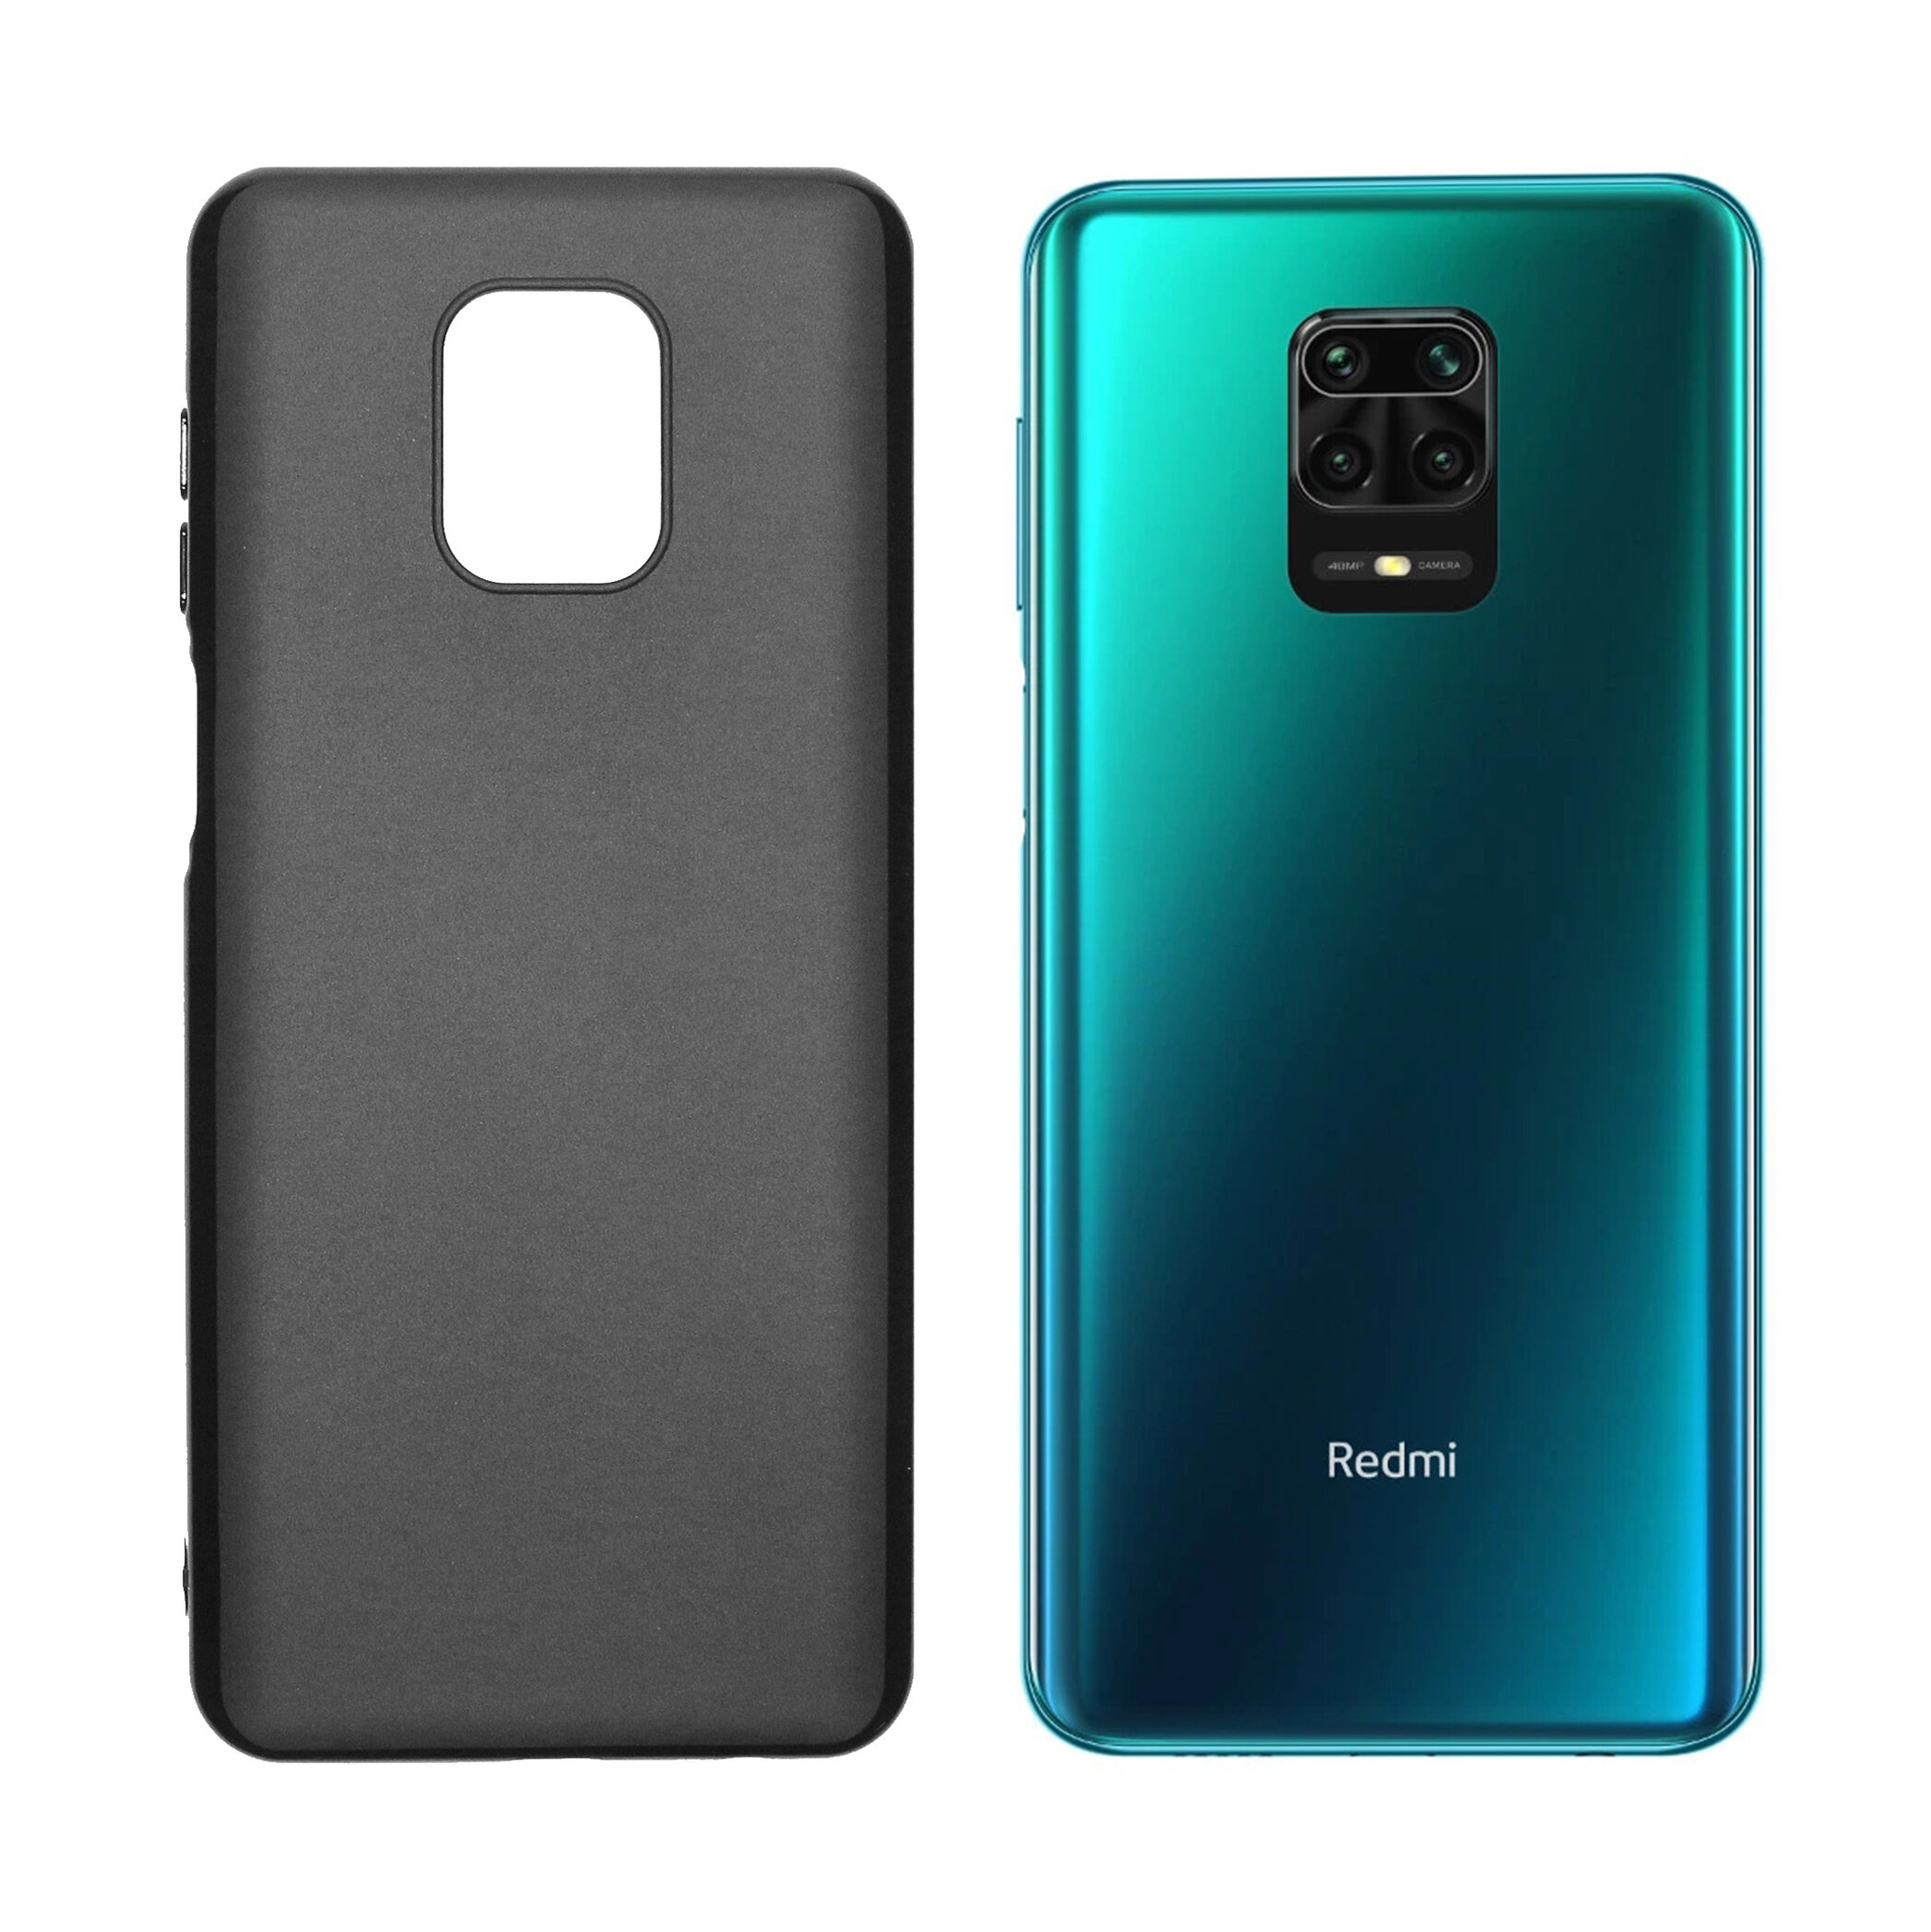 Bakeey Pudding Frosted Shockproof Ultra-thin Non-yellow Soft TPU Protective Case for Xiaomi Redmi Note 9S / Redmi Note 9